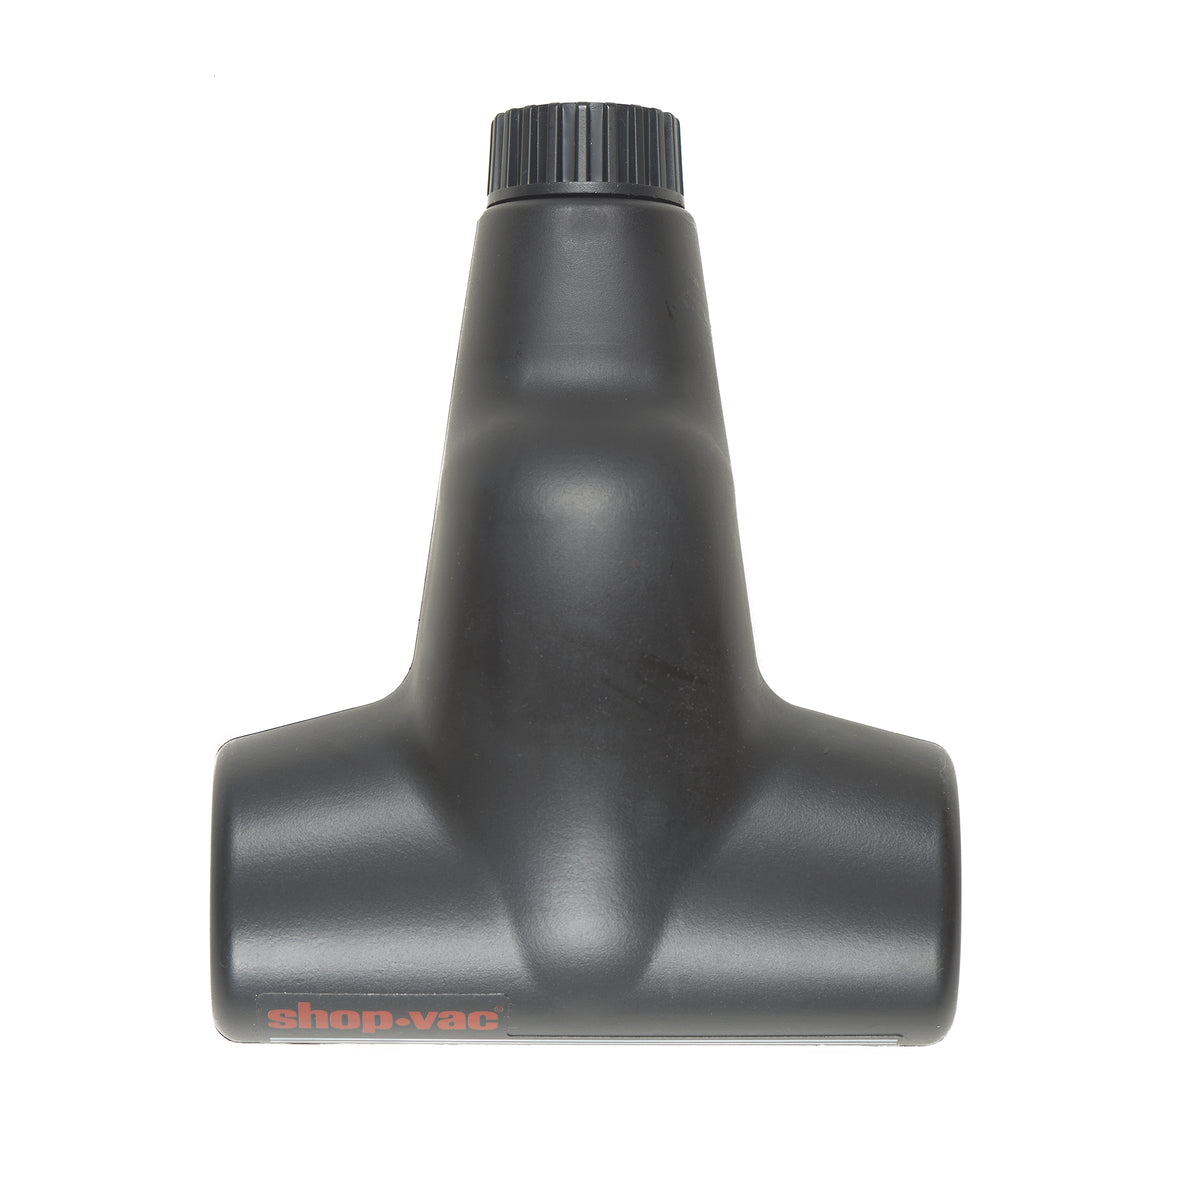 8.3 All Purpose Crevice Nozzle, 1.4 diameter for Vacuums